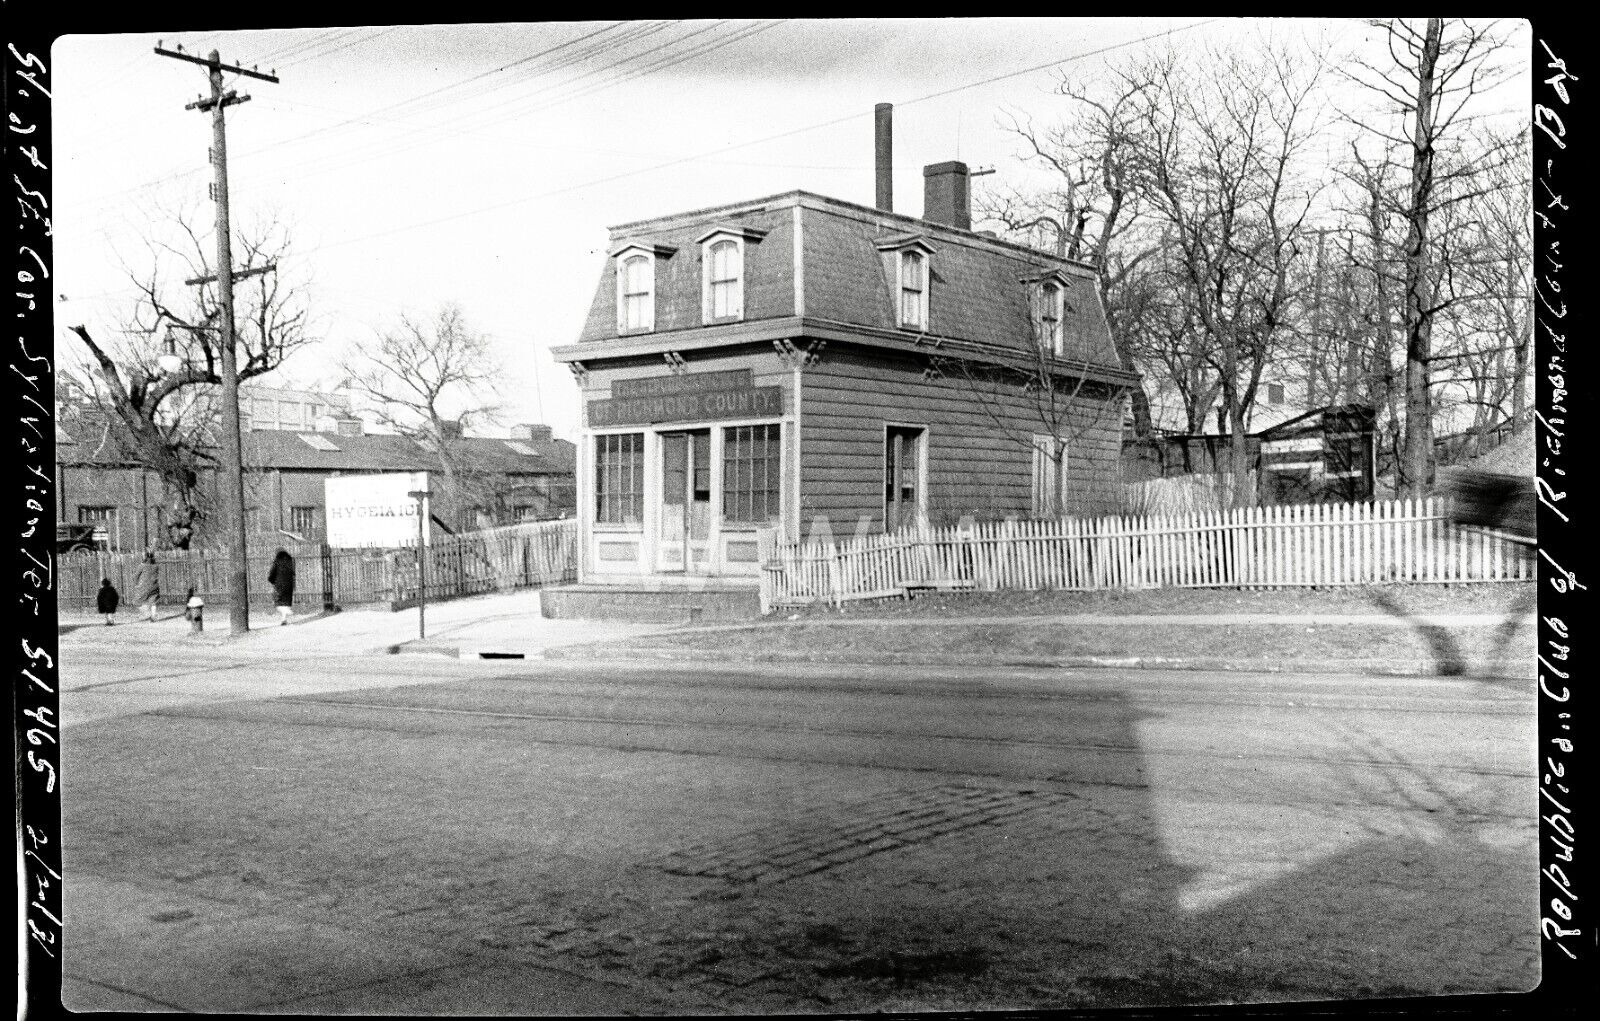 1931 Bay St Republican Club Richmond County Staten Is NYC Old Photo Negative D9